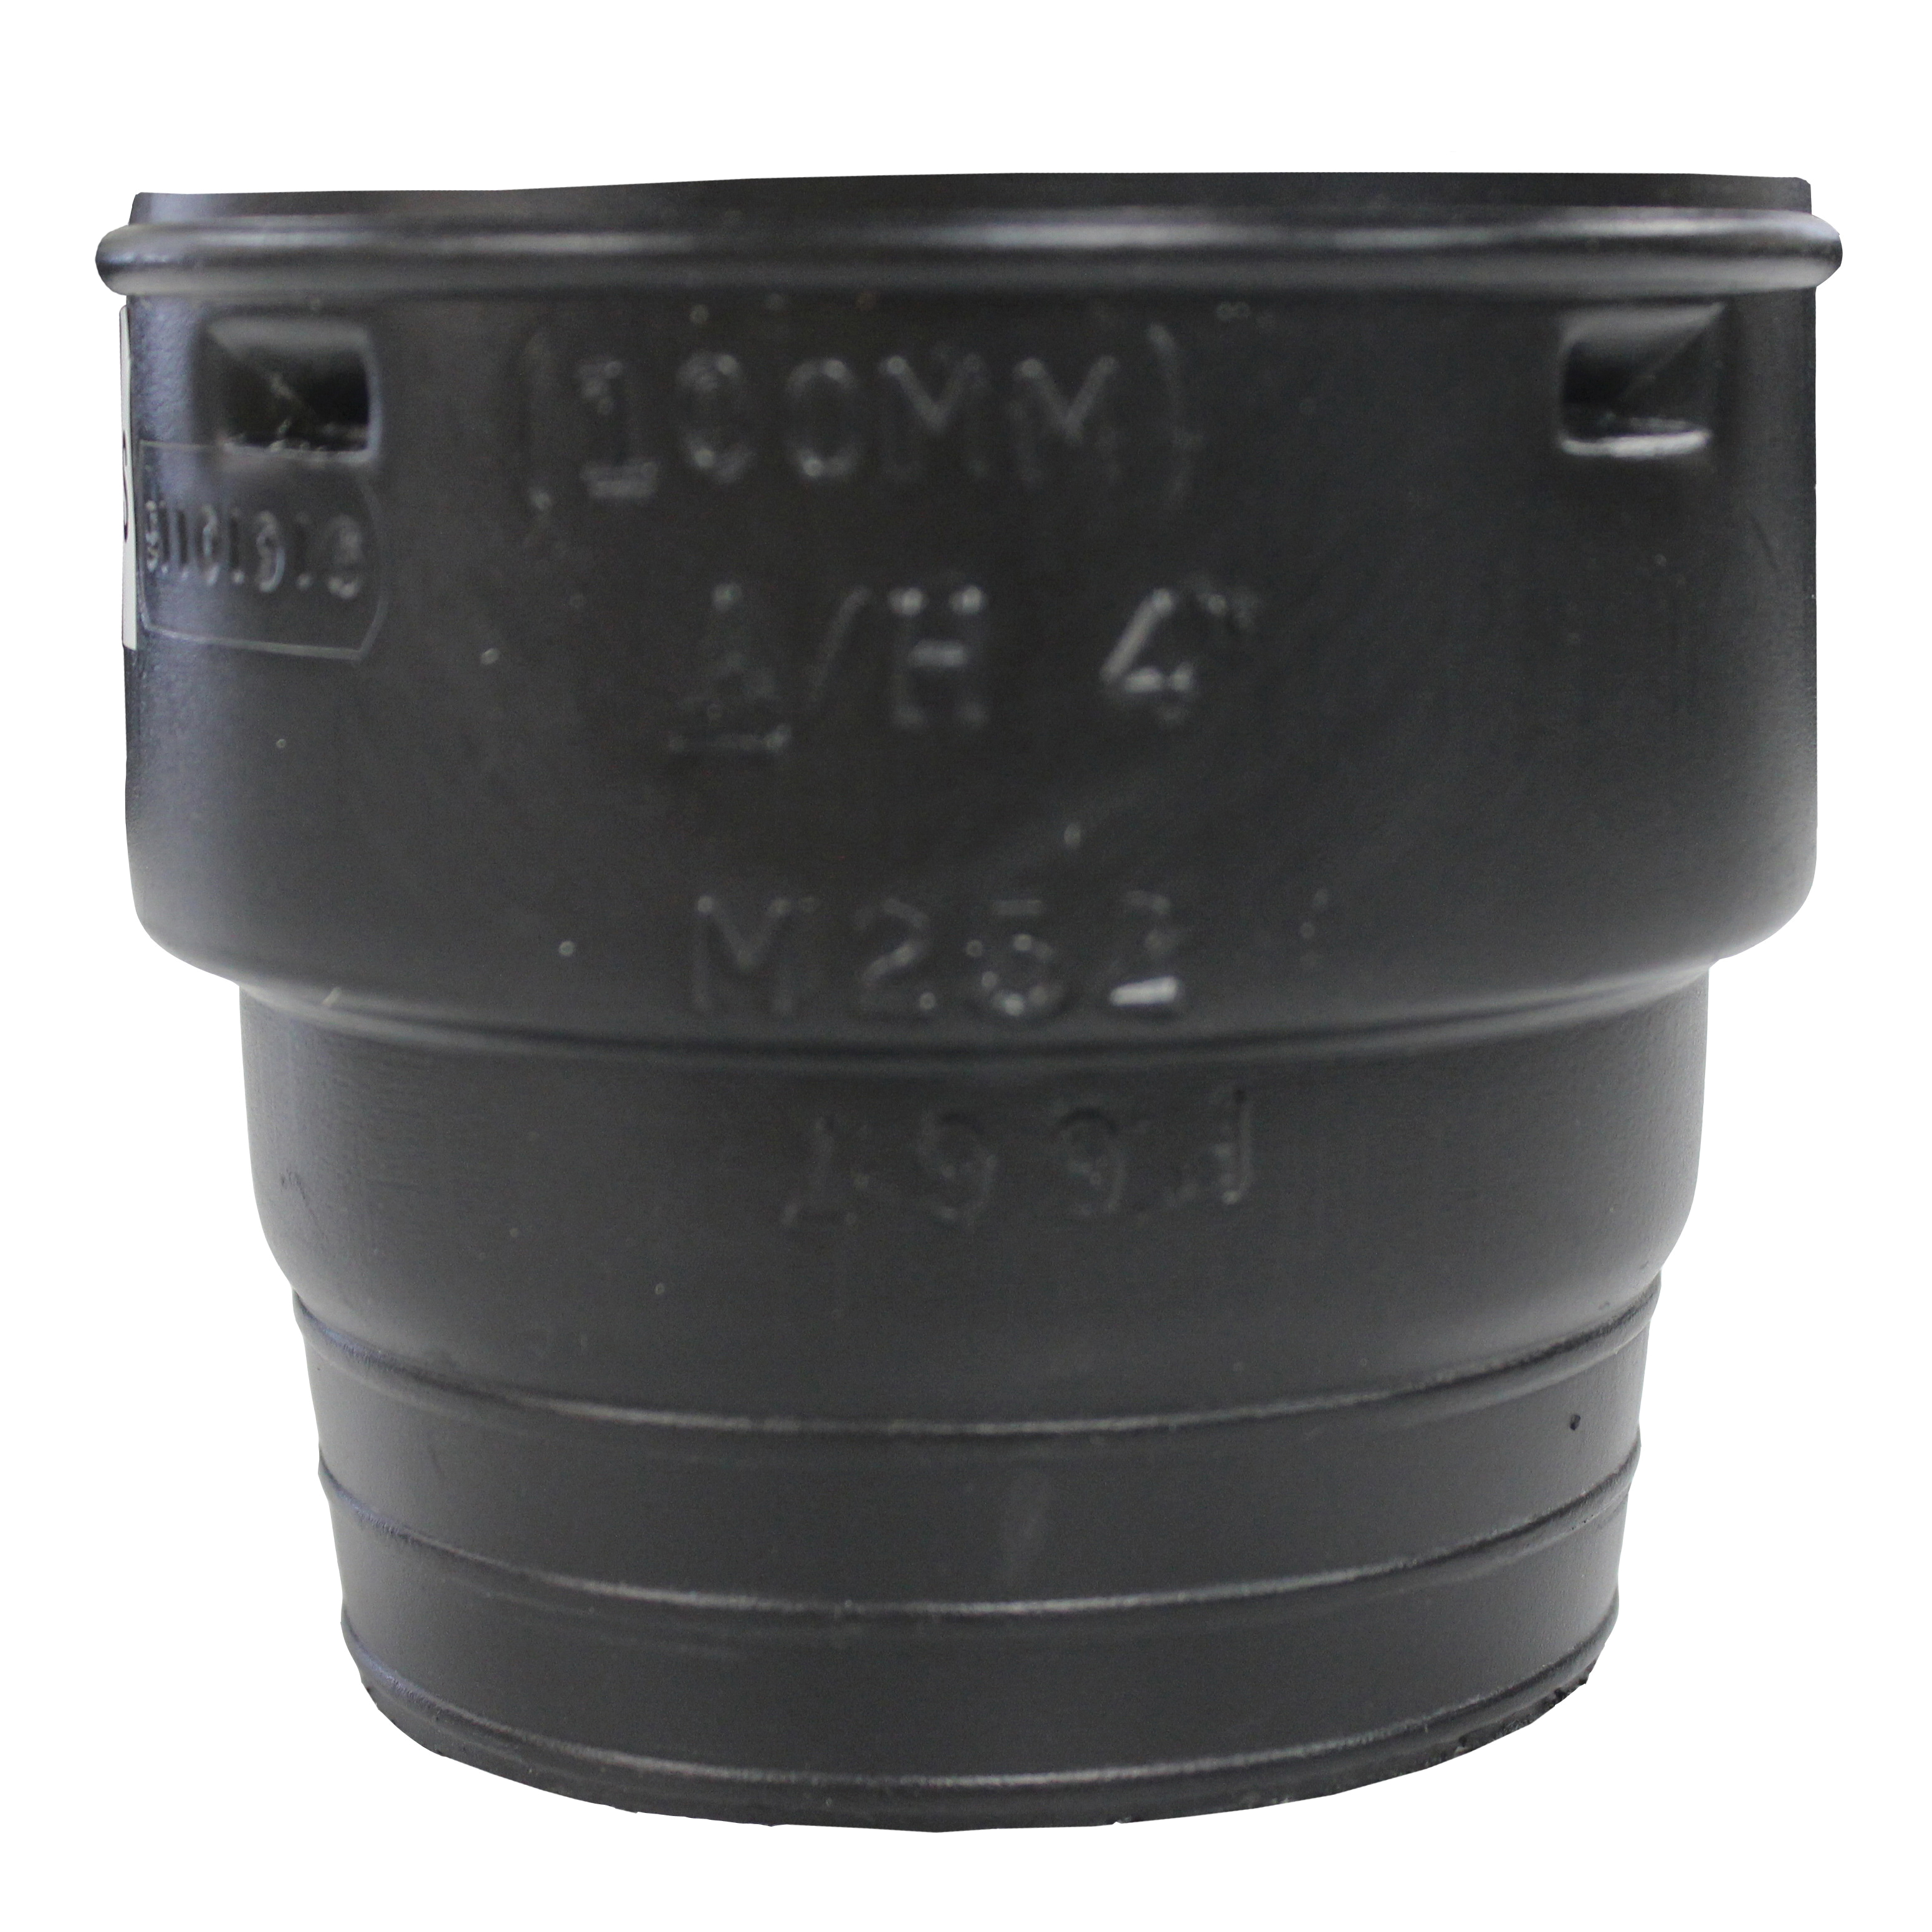 ADS® 0462AA Clay Adapter, For Use With Single Wall Pipe, 4 in, HDPE, Domestic